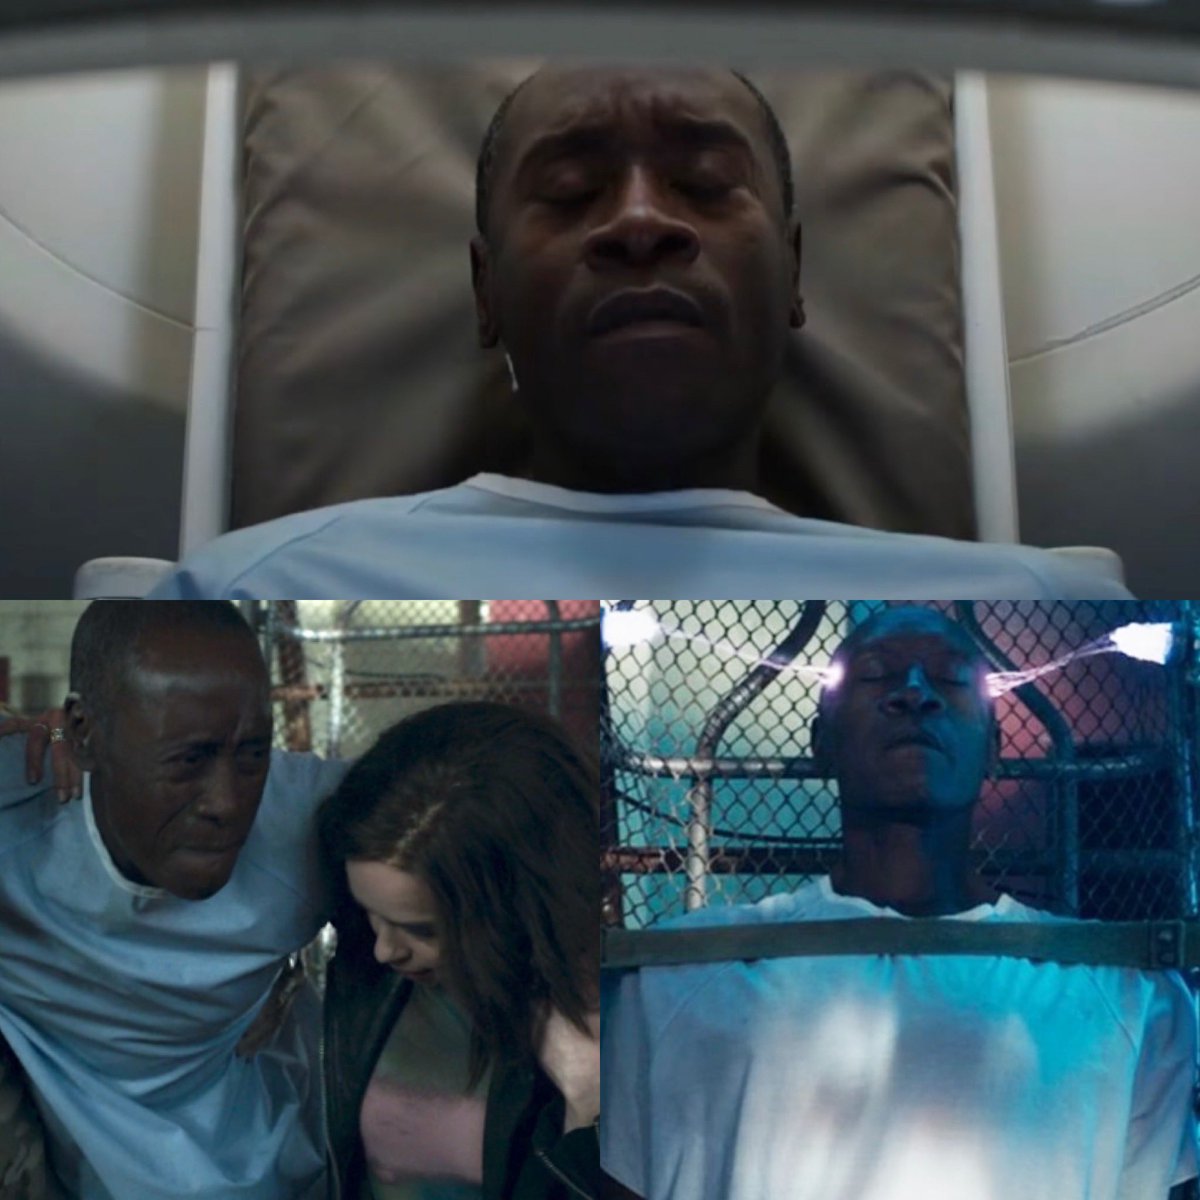 Marvel Studios decision to make #Rhodey a Skrull since his accident in Captain America: Civil War is a bold strategy. The reveal held tremendous potential to be an epic moment in #SecretInvasion, but it lacked the impact it deserved, almost as if it could be altered if fans hated… https://t.co/Go51S6uMDS https://t.co/tfP47ui1vg